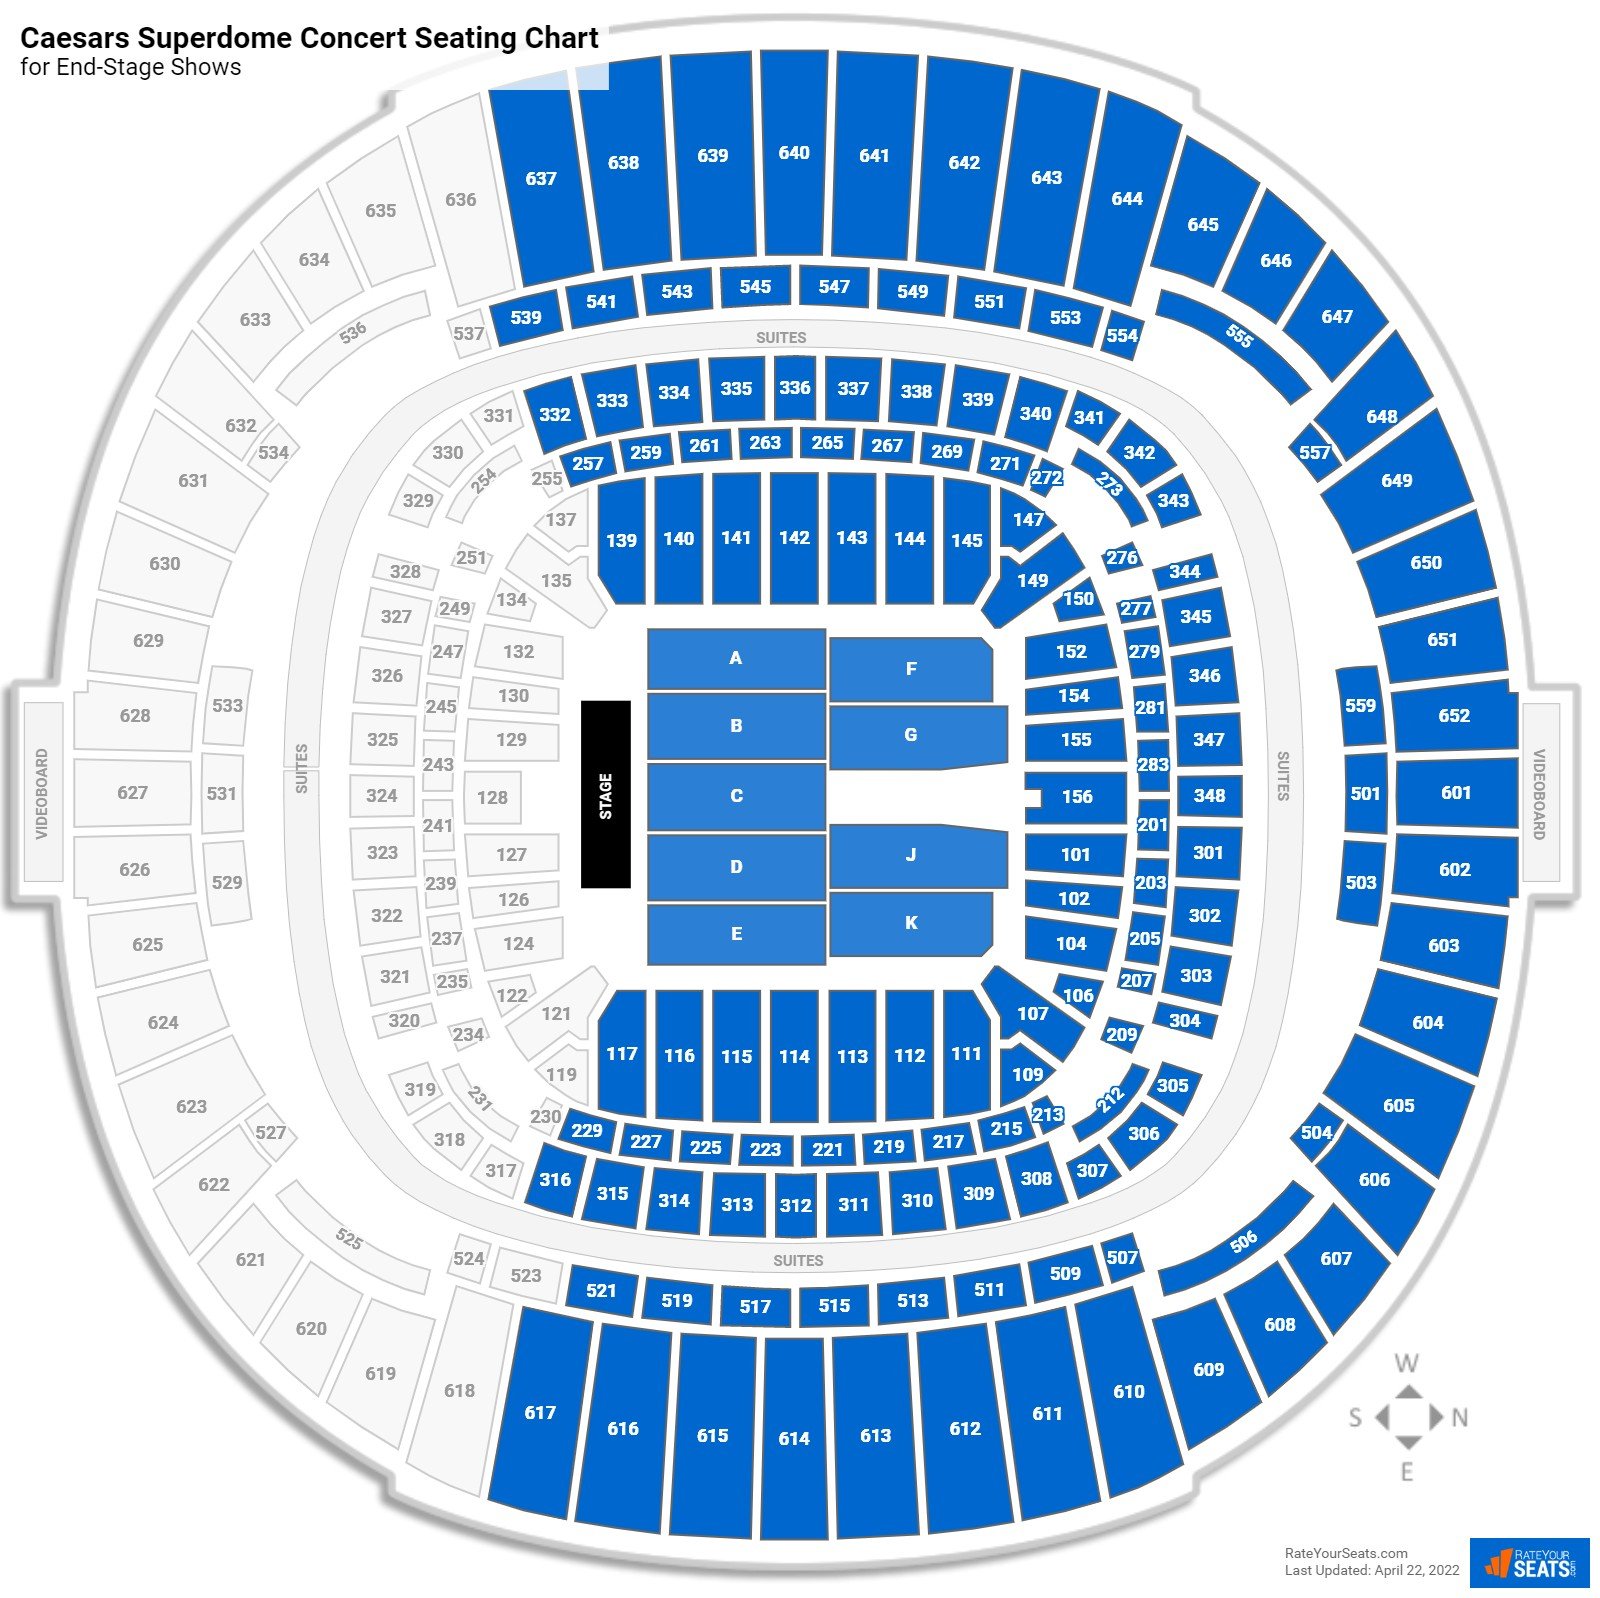 Mercedes Superdome Seating Chart Wrestlemania Elcho Table